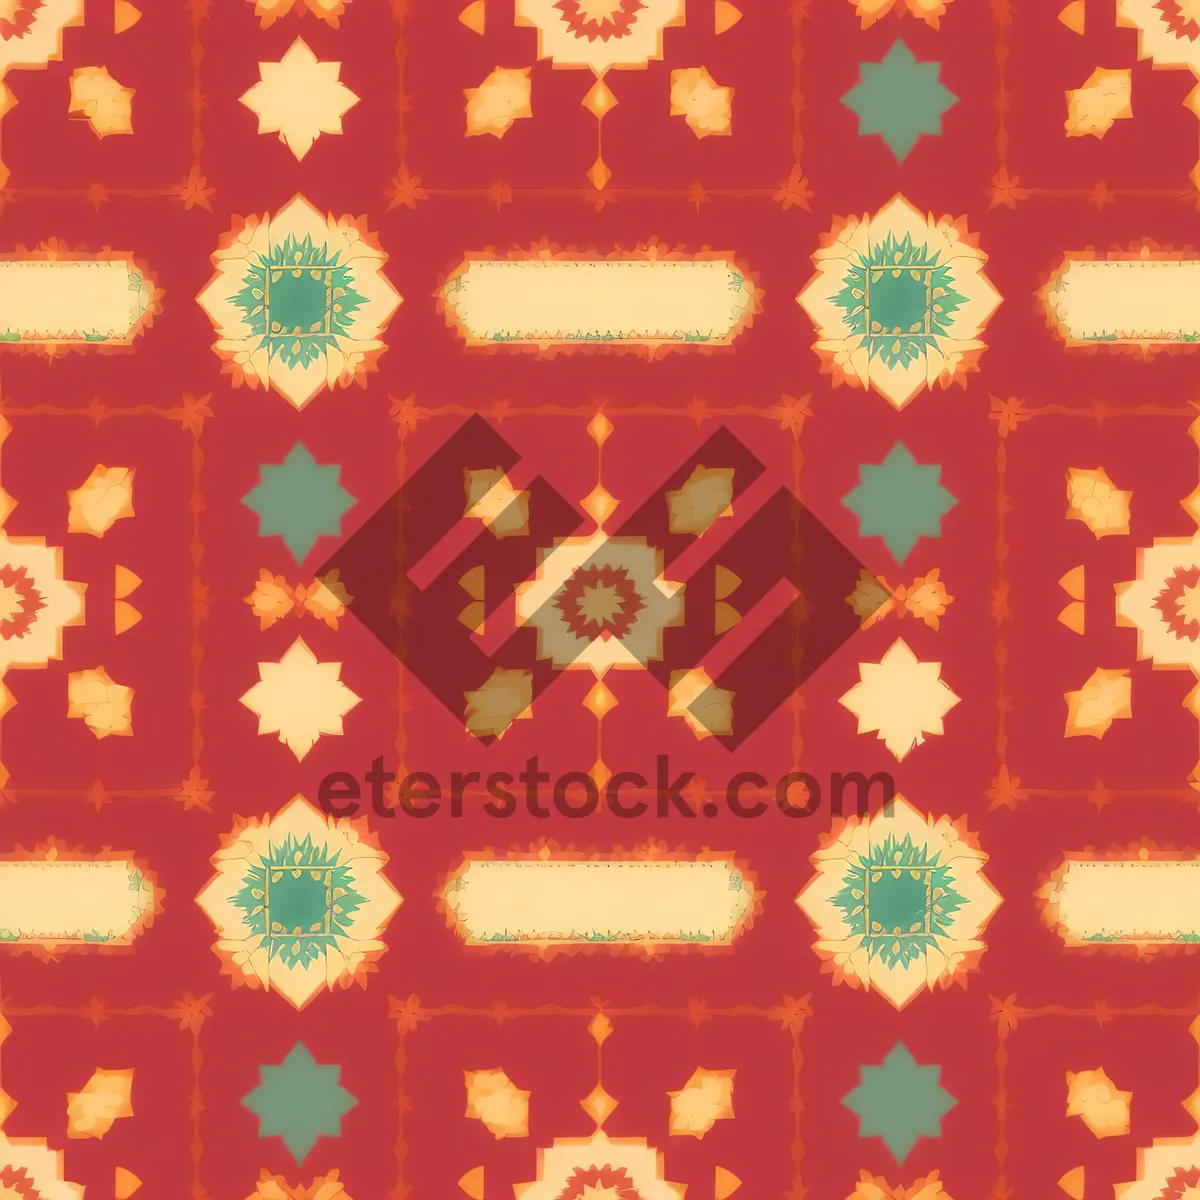 Picture of Ornate Floral Damask Design with Retro Textile Revival